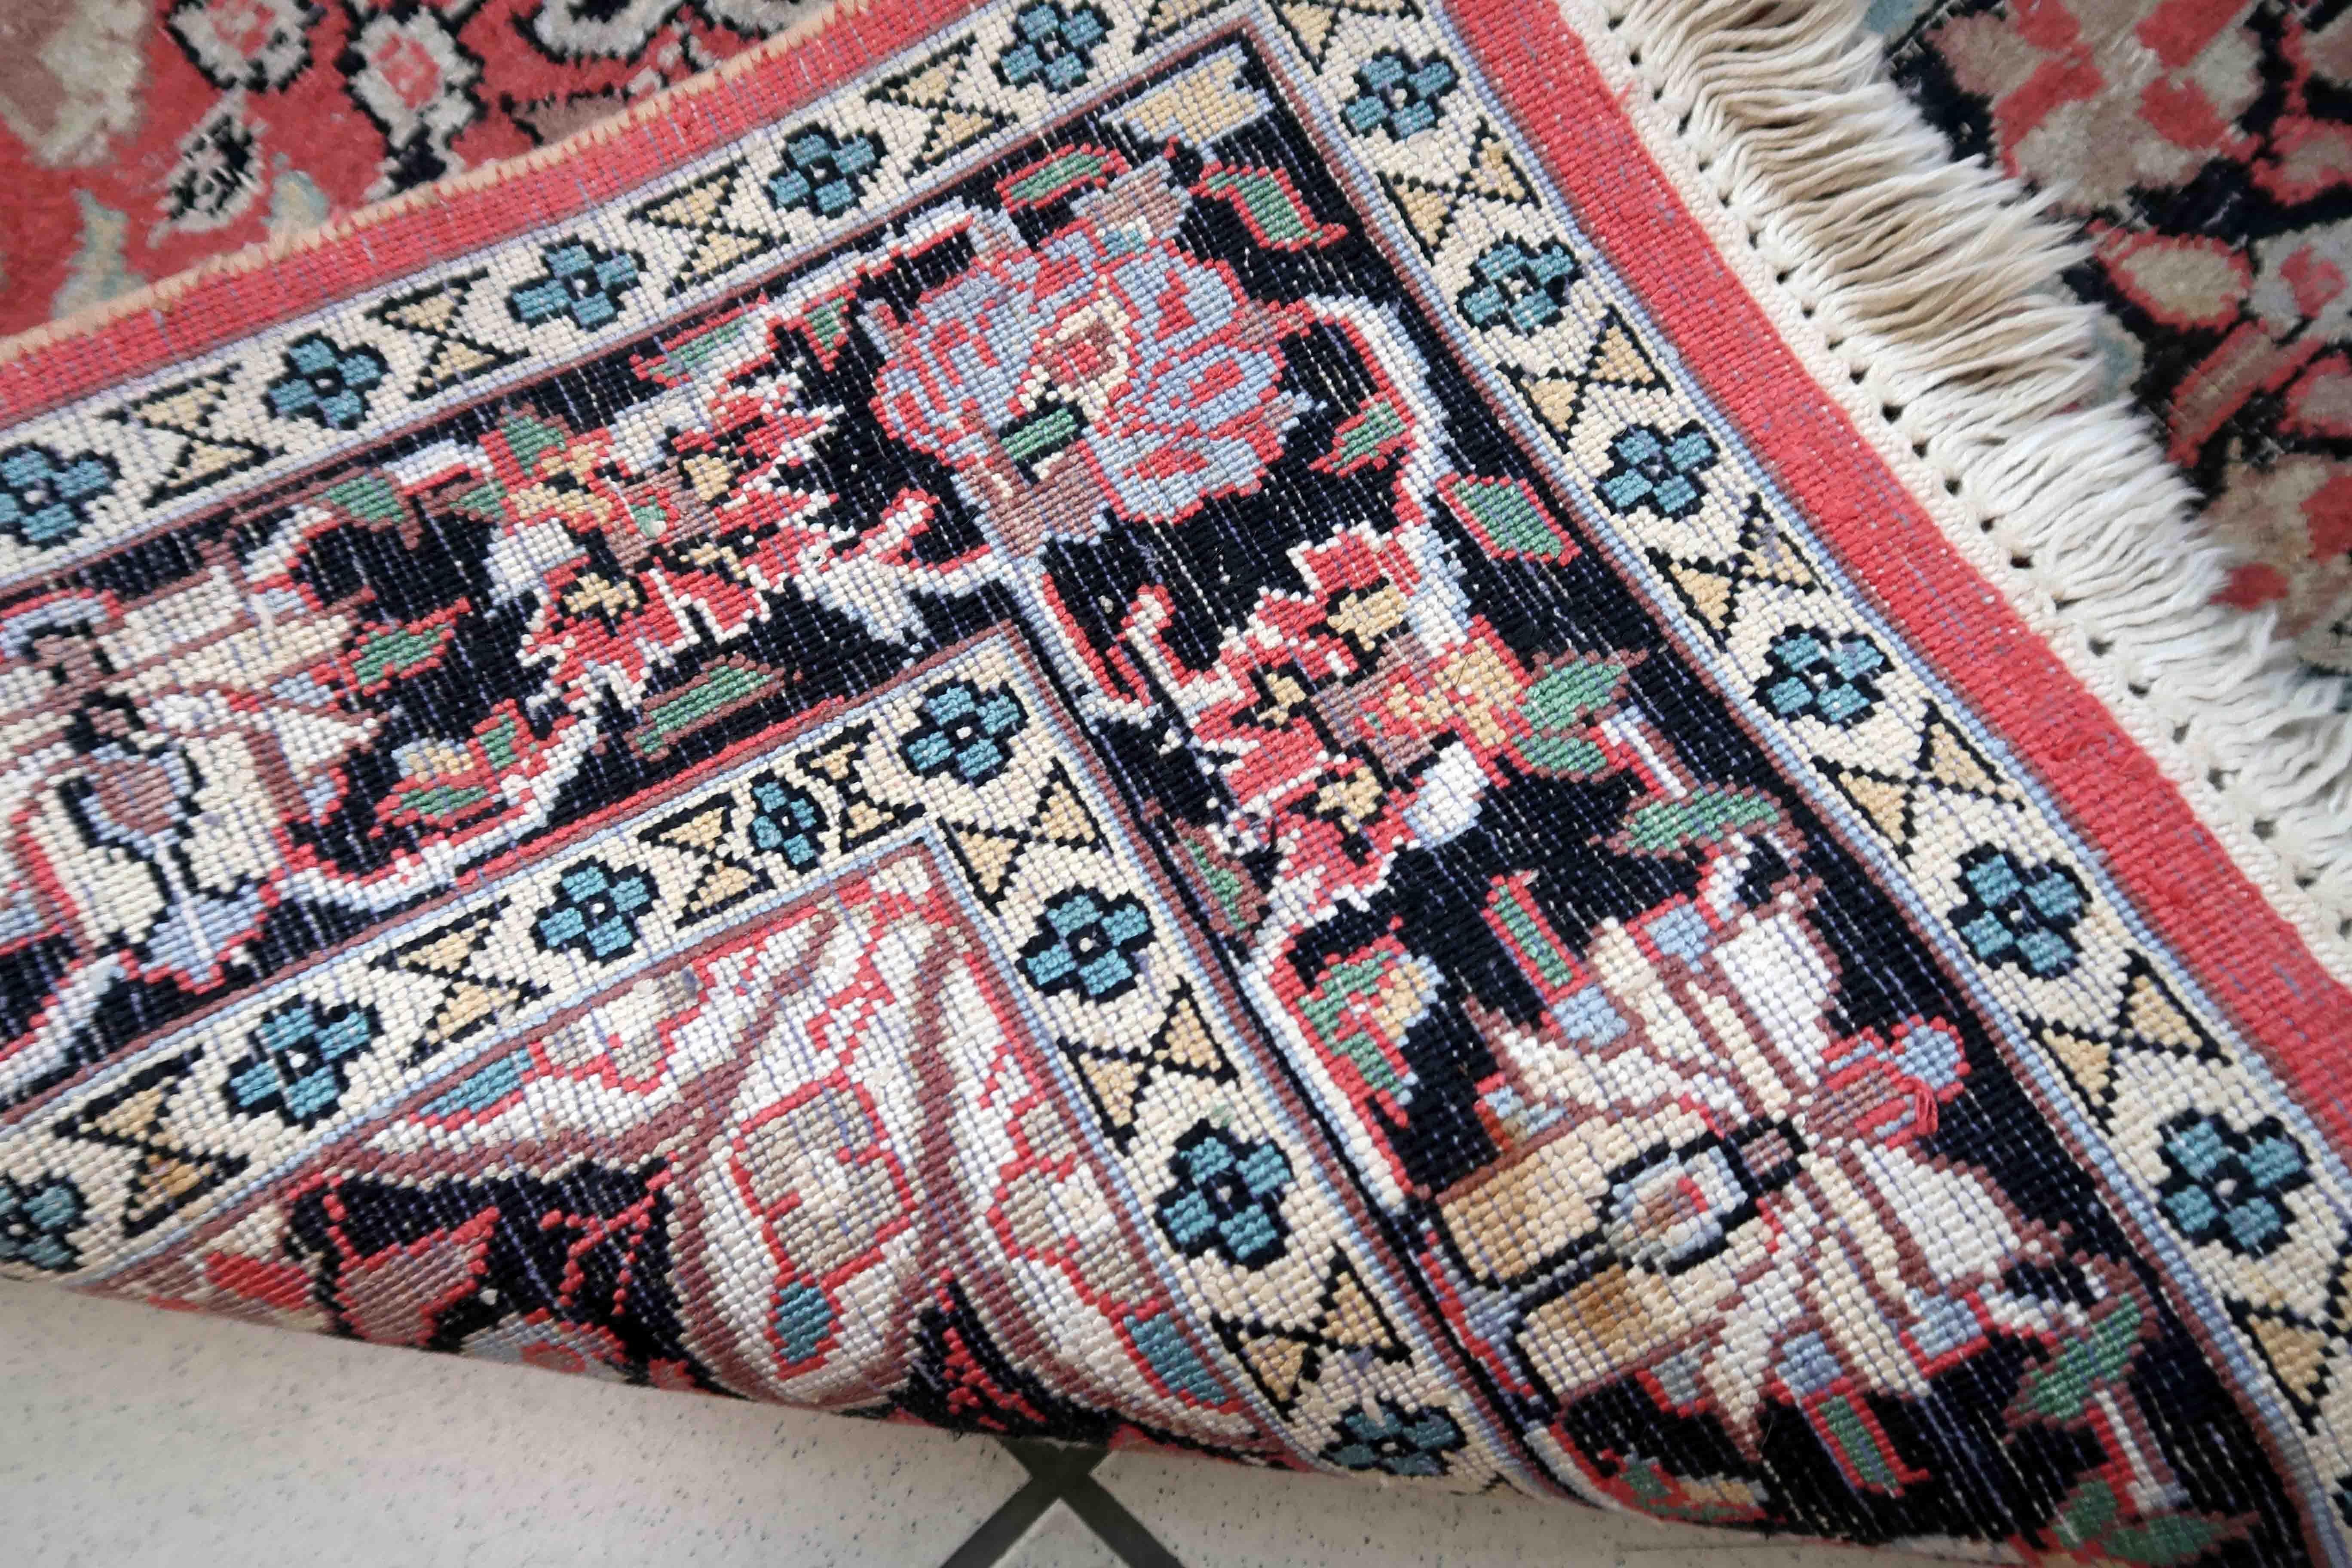 Handmade vintage Persian Tabriz rug made in Kashmir wool. The rug is from the end of 20th century in original good condition. The rug is in traditional medallion design in pink and black colors. Like many recent Tabrizes, this example shows floral